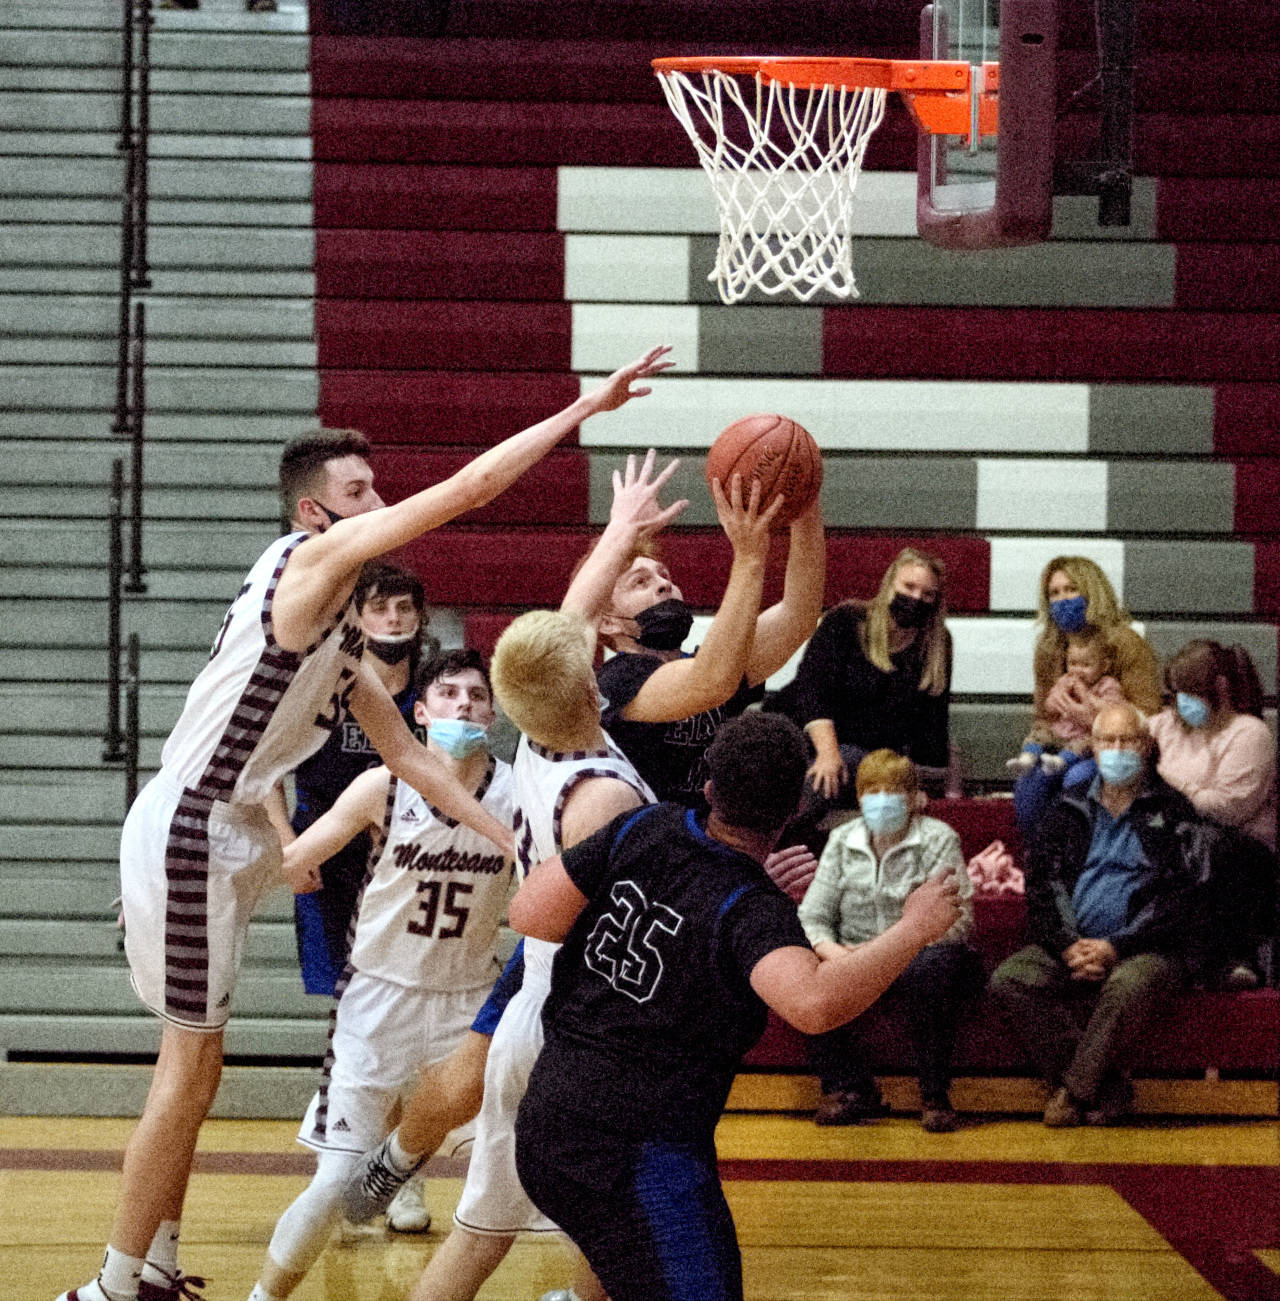 RYAN SPARKS | THE DAILY WORLD Elma’s Nick Church, background, is swarmed by Montesano defenders during Elma’s 55-36 victory on Wednesday at Montesano High School.